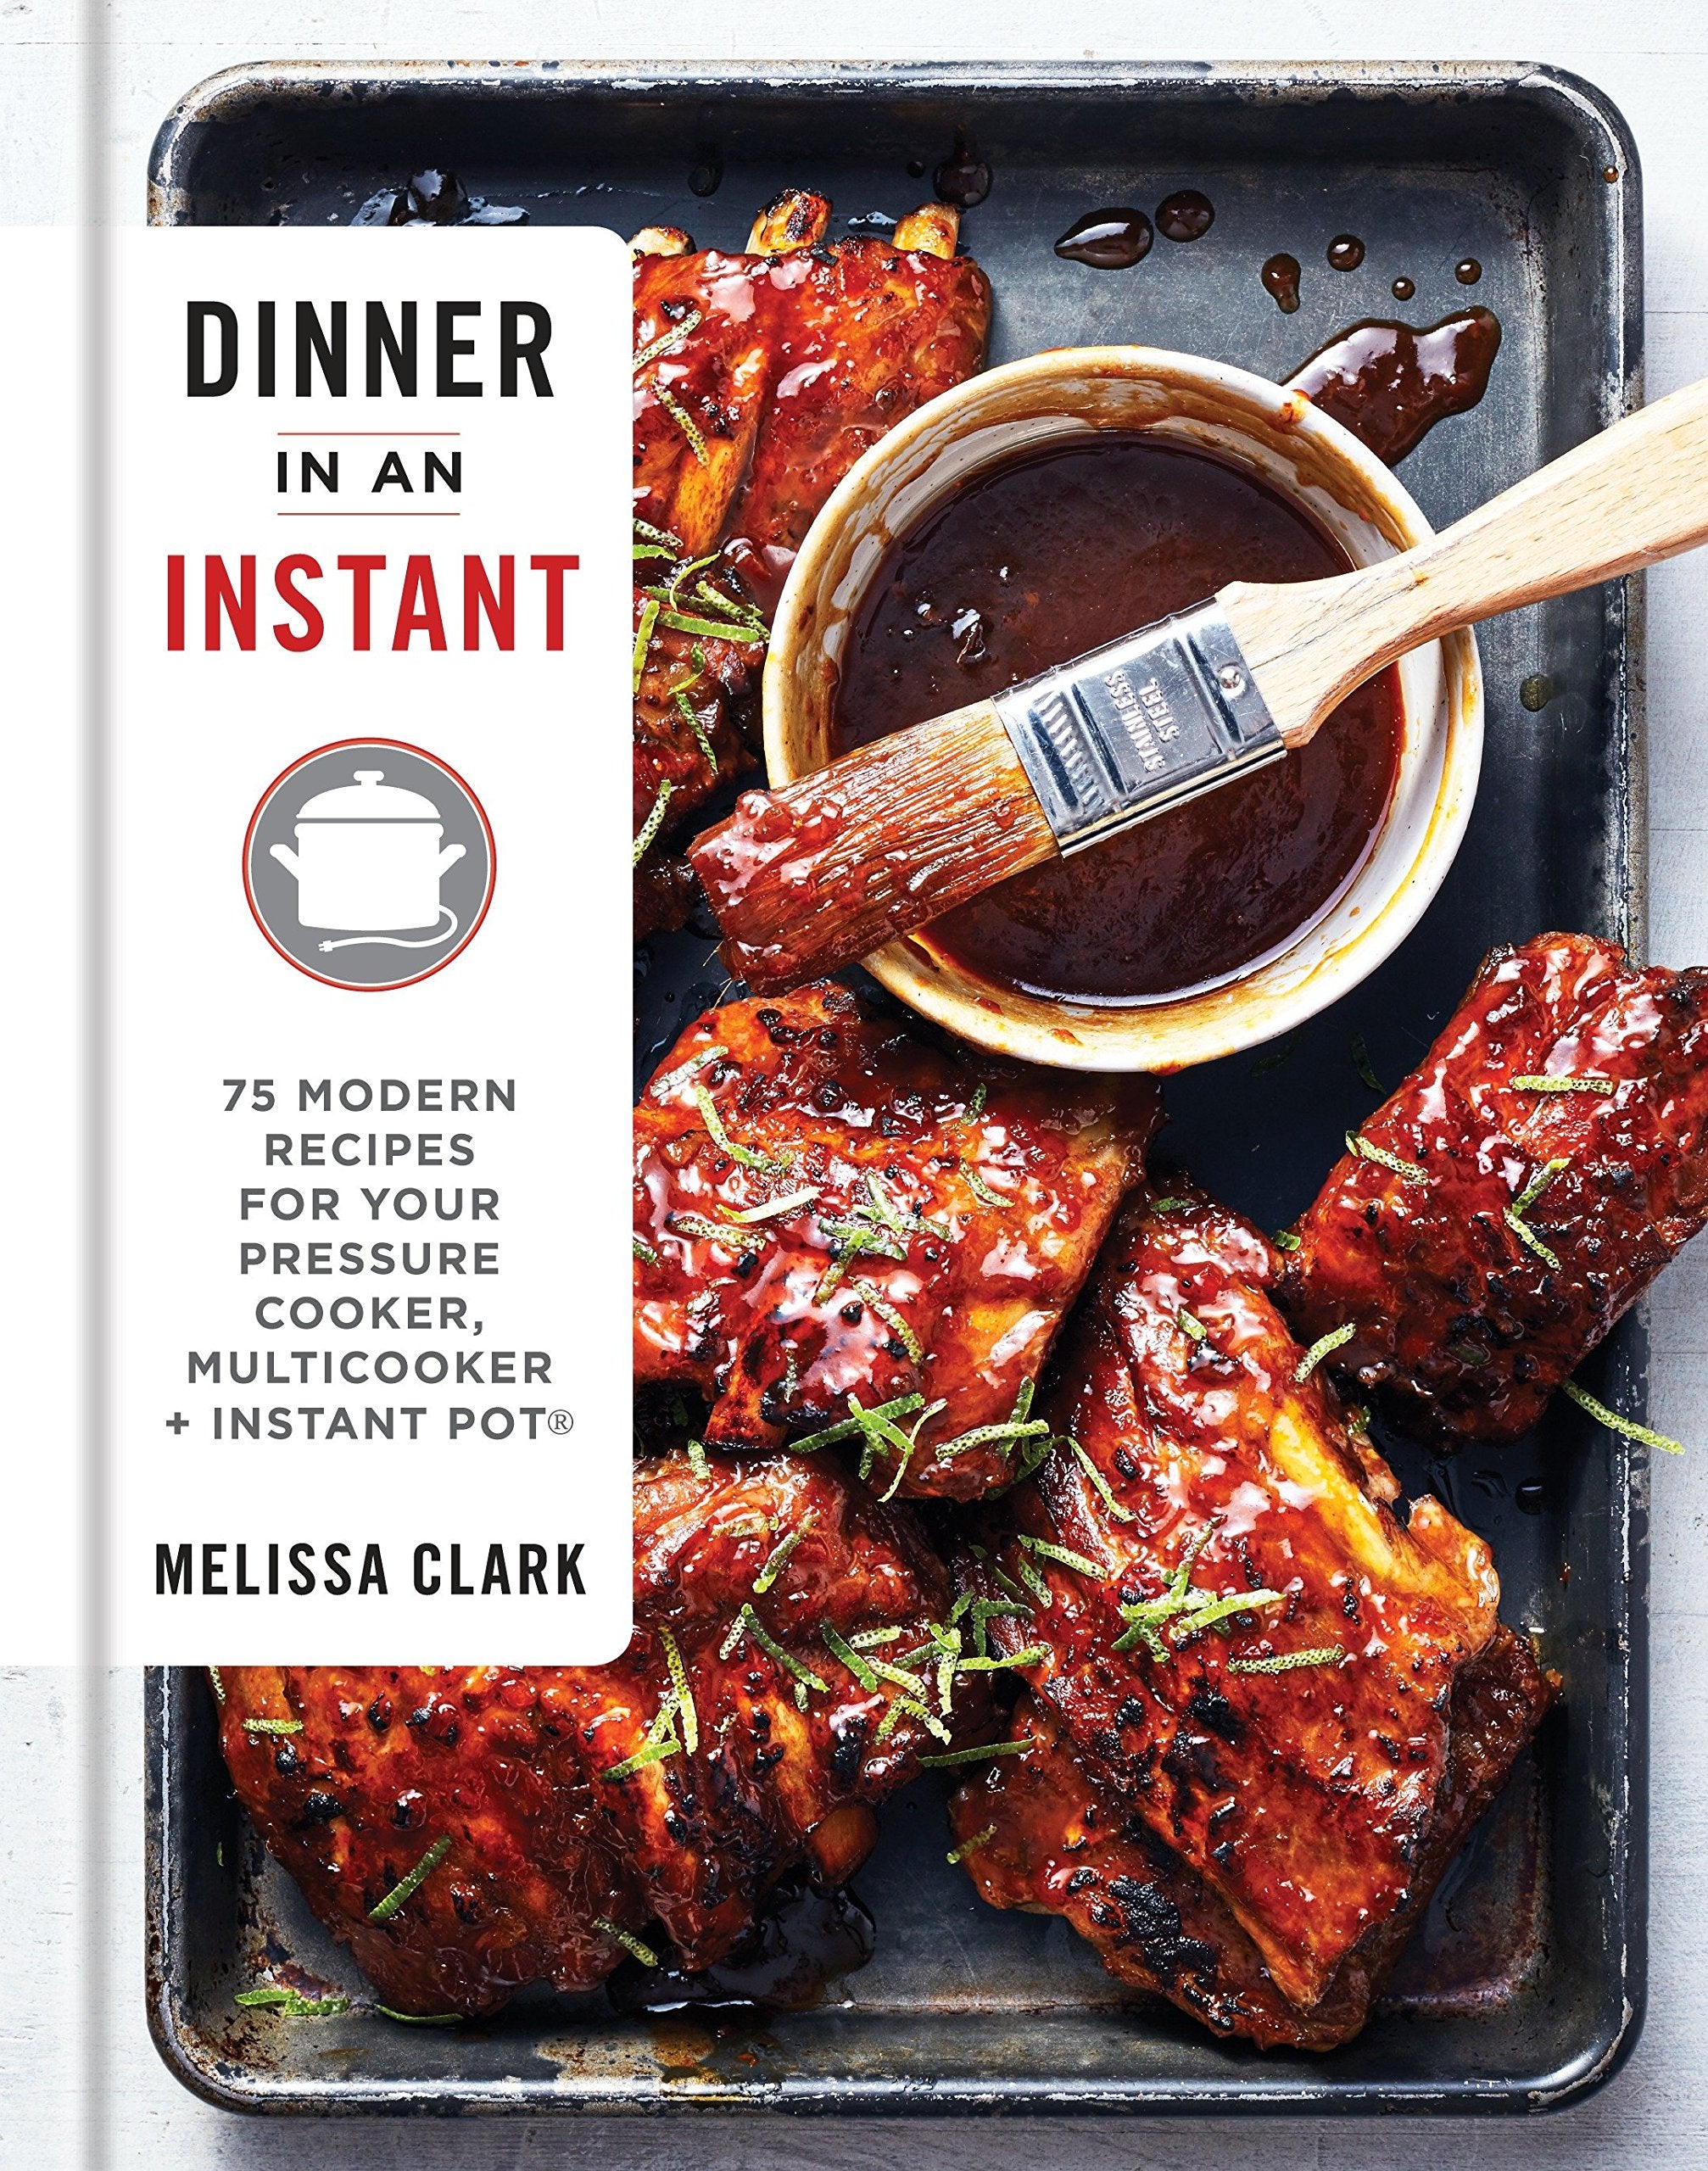 Dinner in an Instant: 75 Modern Recipes for Your Pressure Cooker, Multicooker, and Instant Pot (Melissa Clark) *Signed*